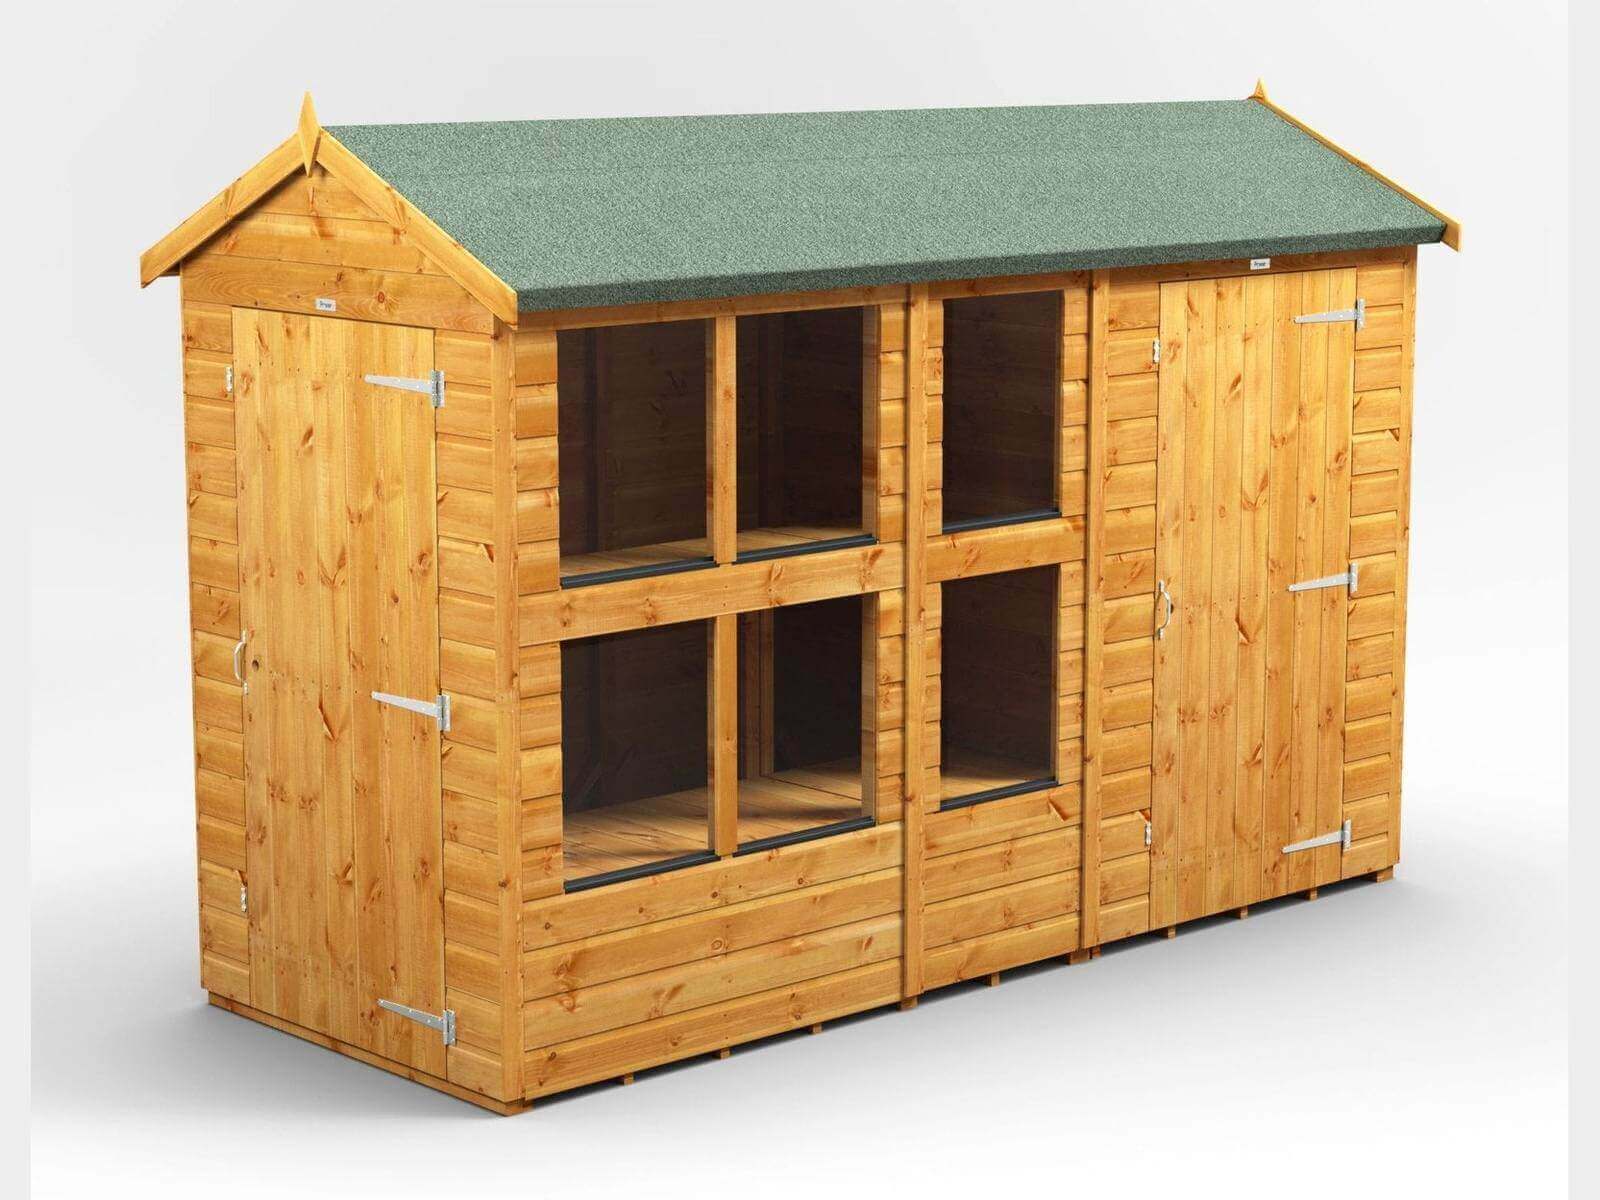 Power Apex Wooden Potting Shed Combi Various Sizes Shed Sizes: 10x4 (includes 6ft Side Store)